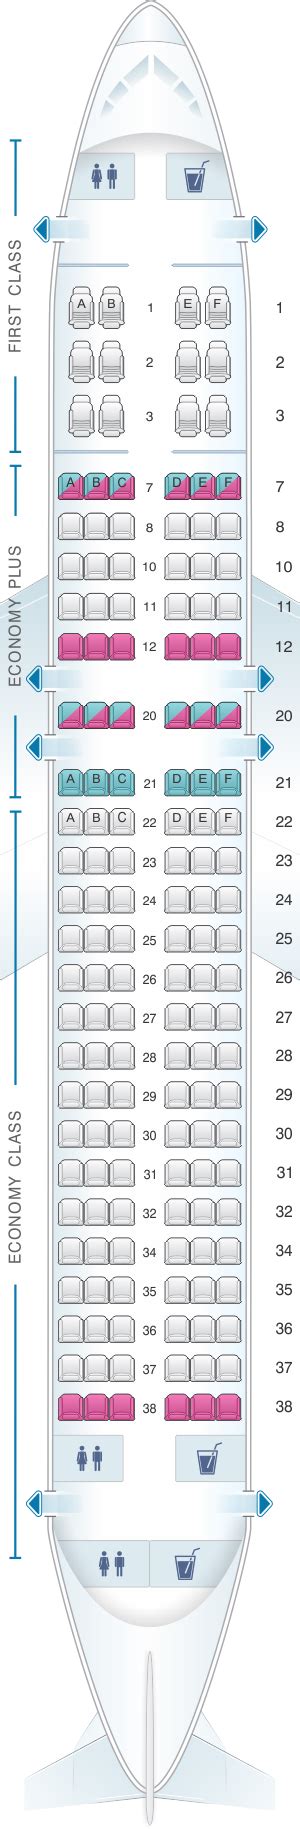 Airbus A United Airlines Seating Chart Seat Map United Airlines